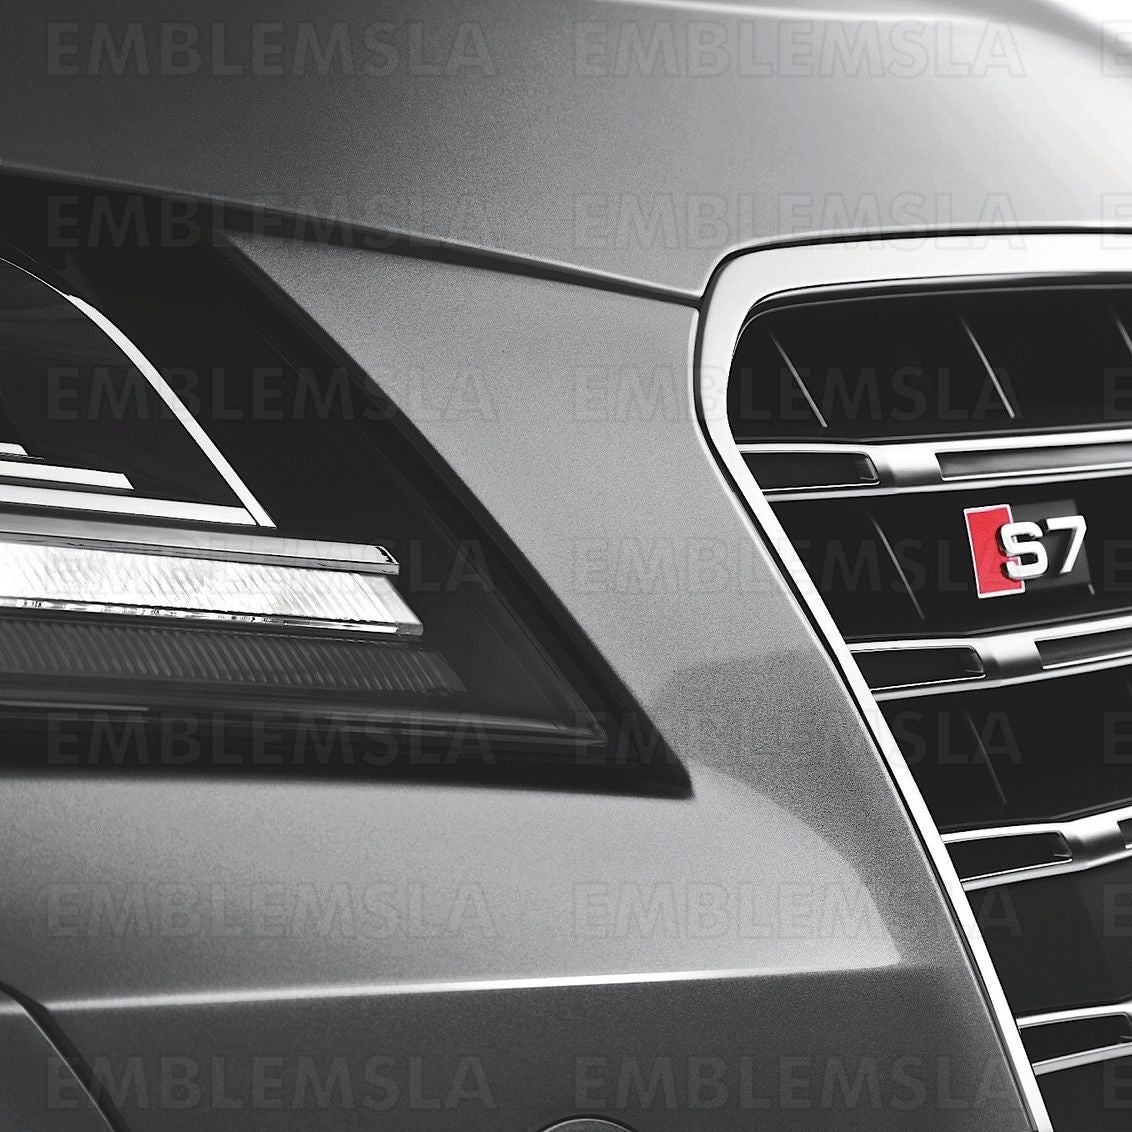 Audi S7 Front Grill Emblem Chrome fit A7 S7 Hood Grille Badge Nameplate